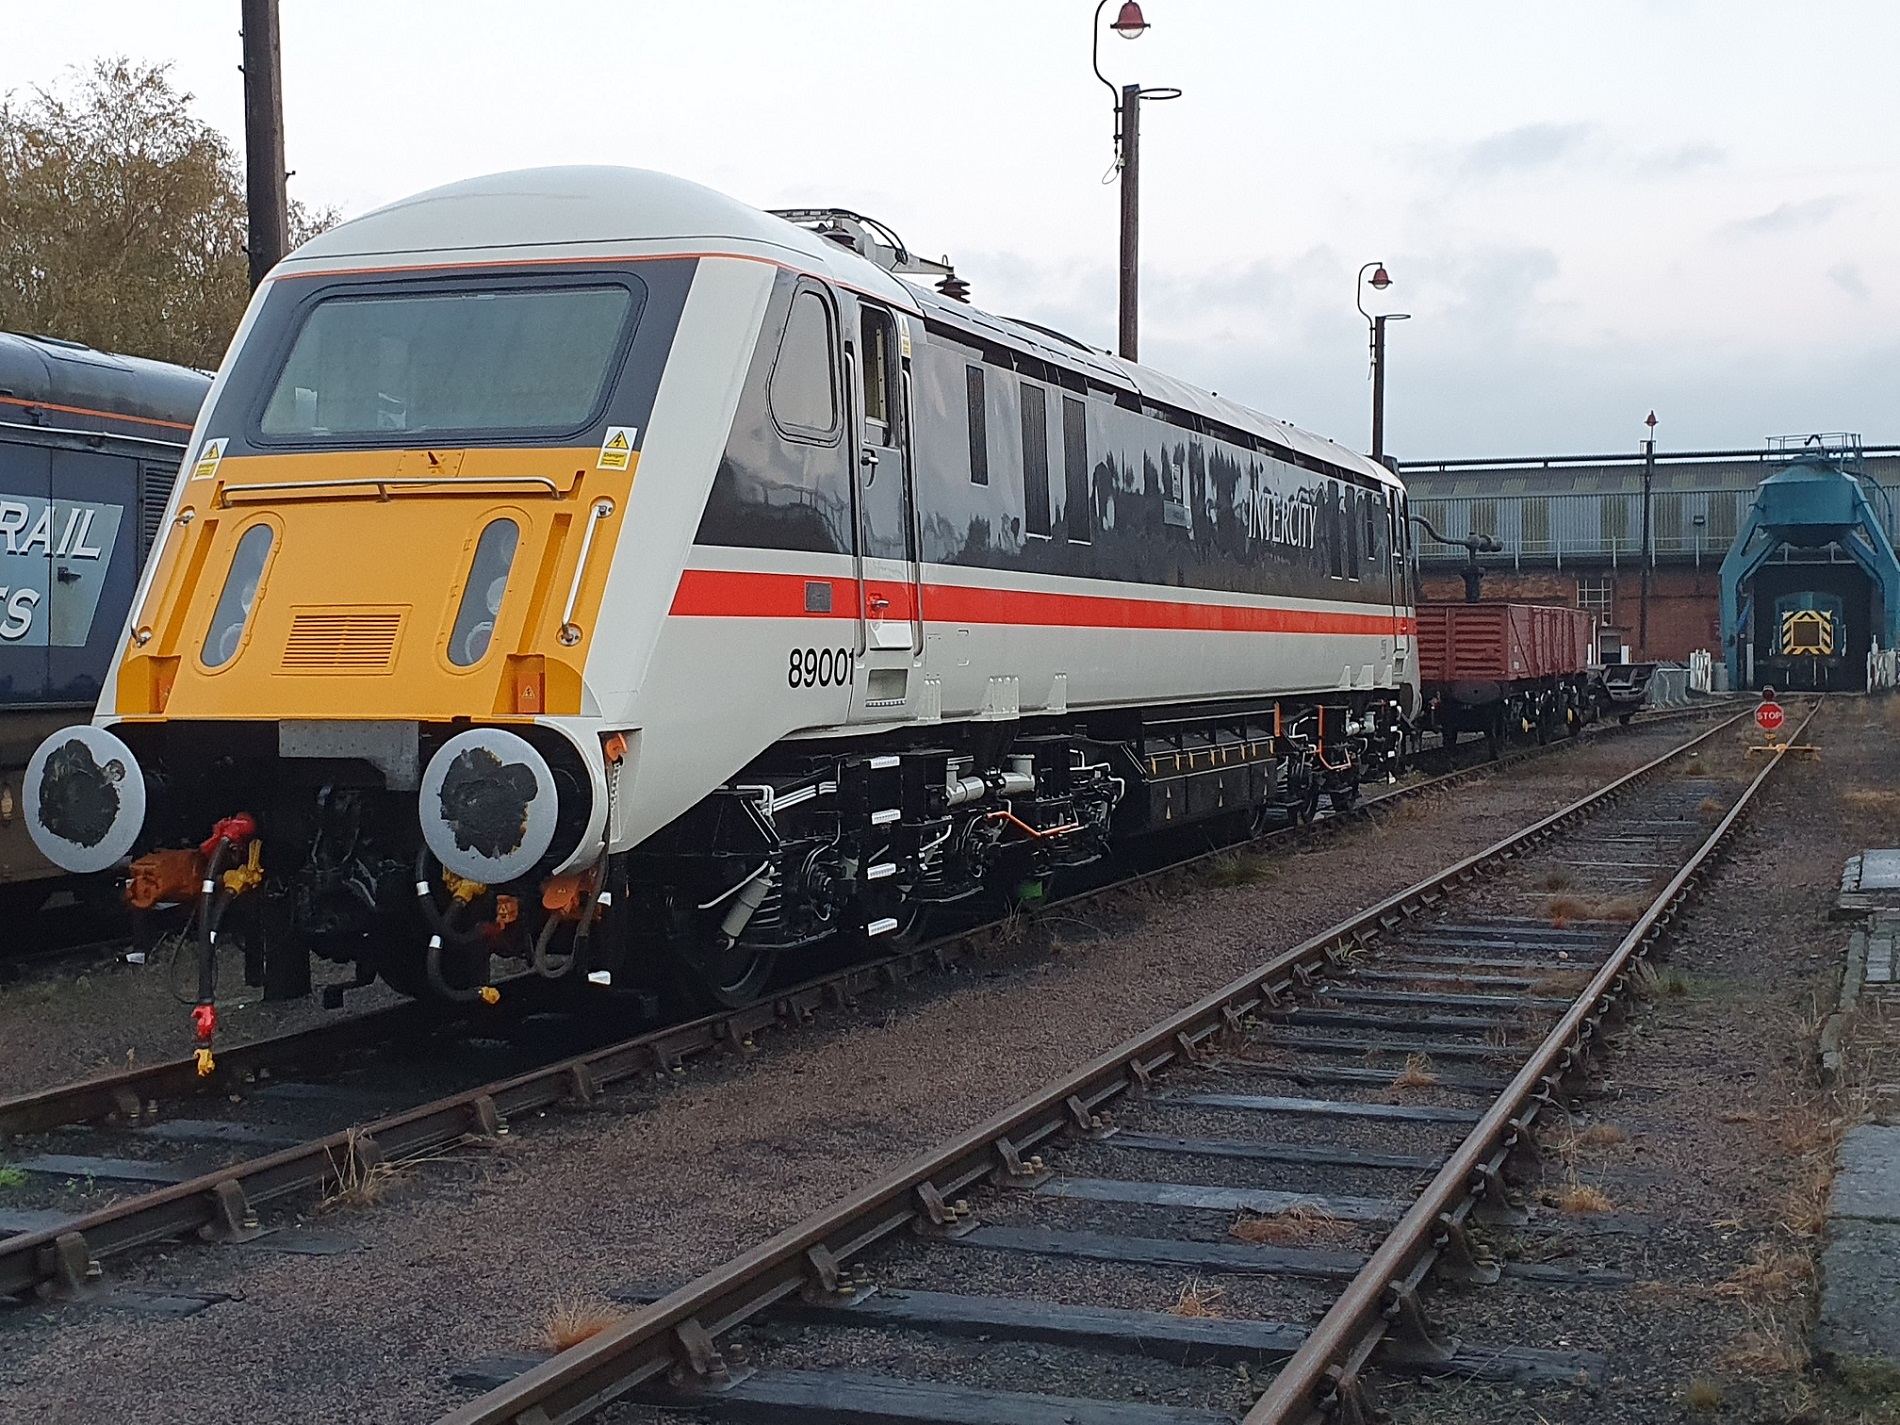 89001 at Barrow Hill after repainting into Inter City Swallow livery